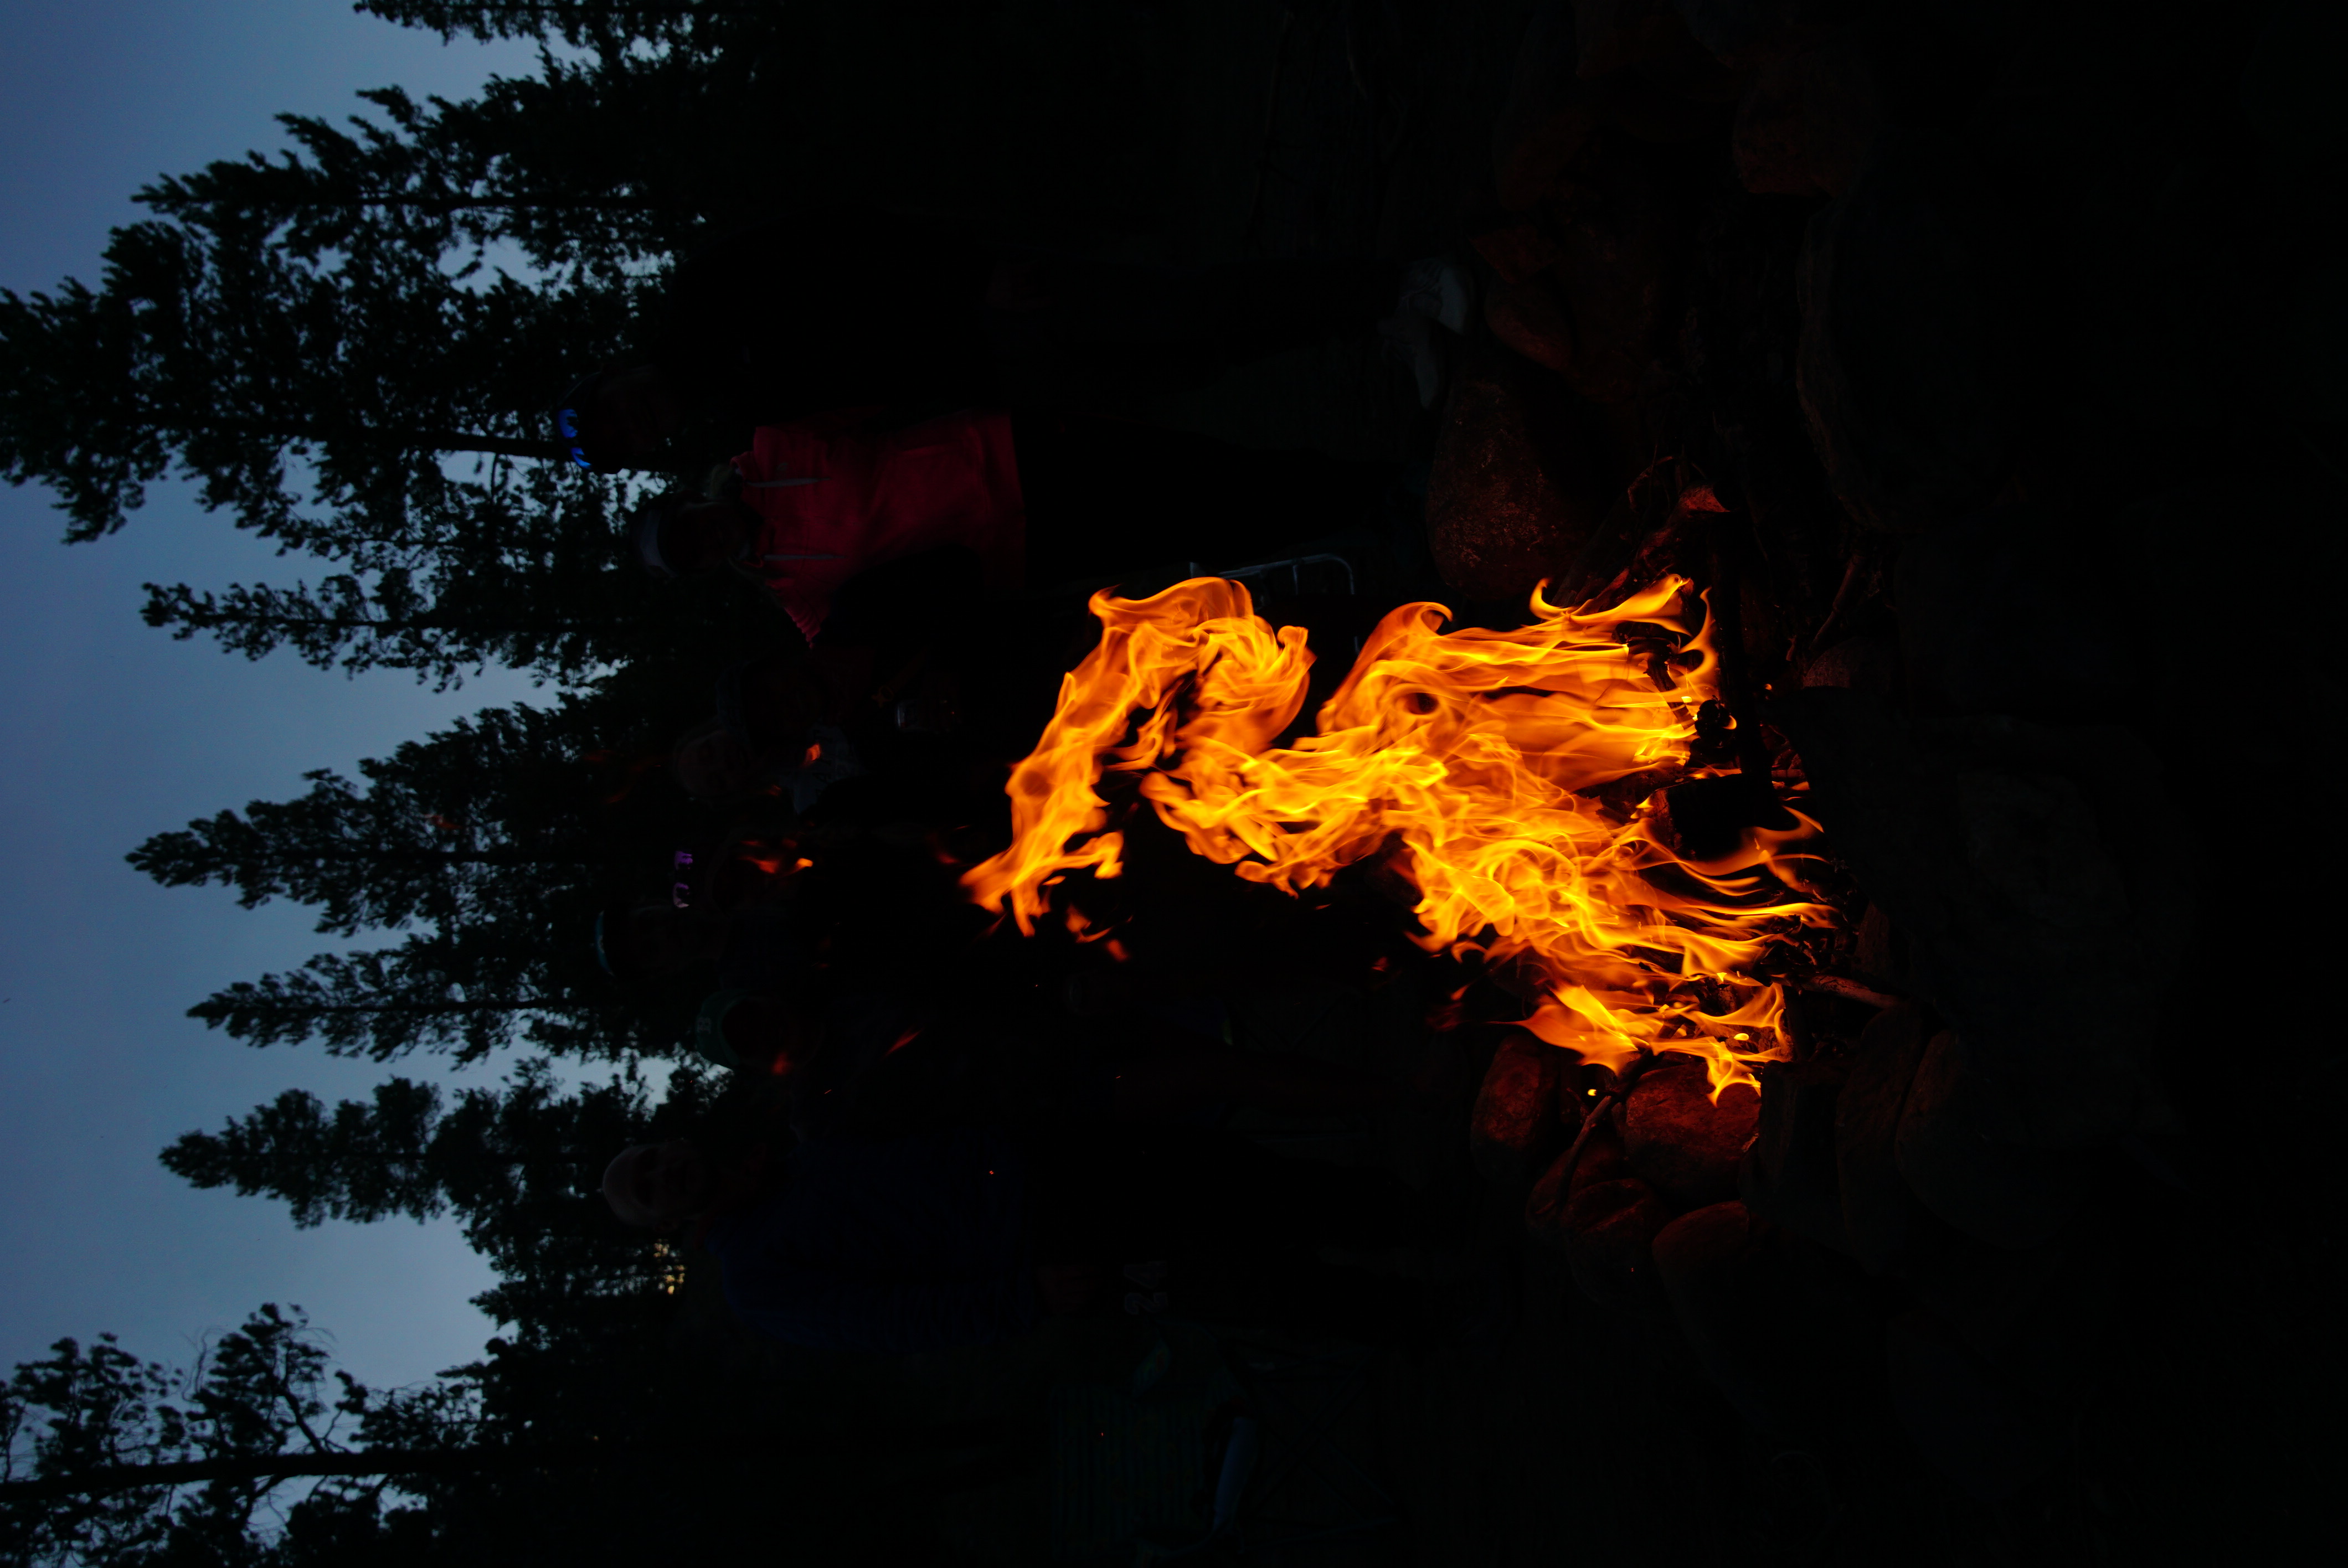 Minimizing campfire impacts is a key principle of Leave No Trace.